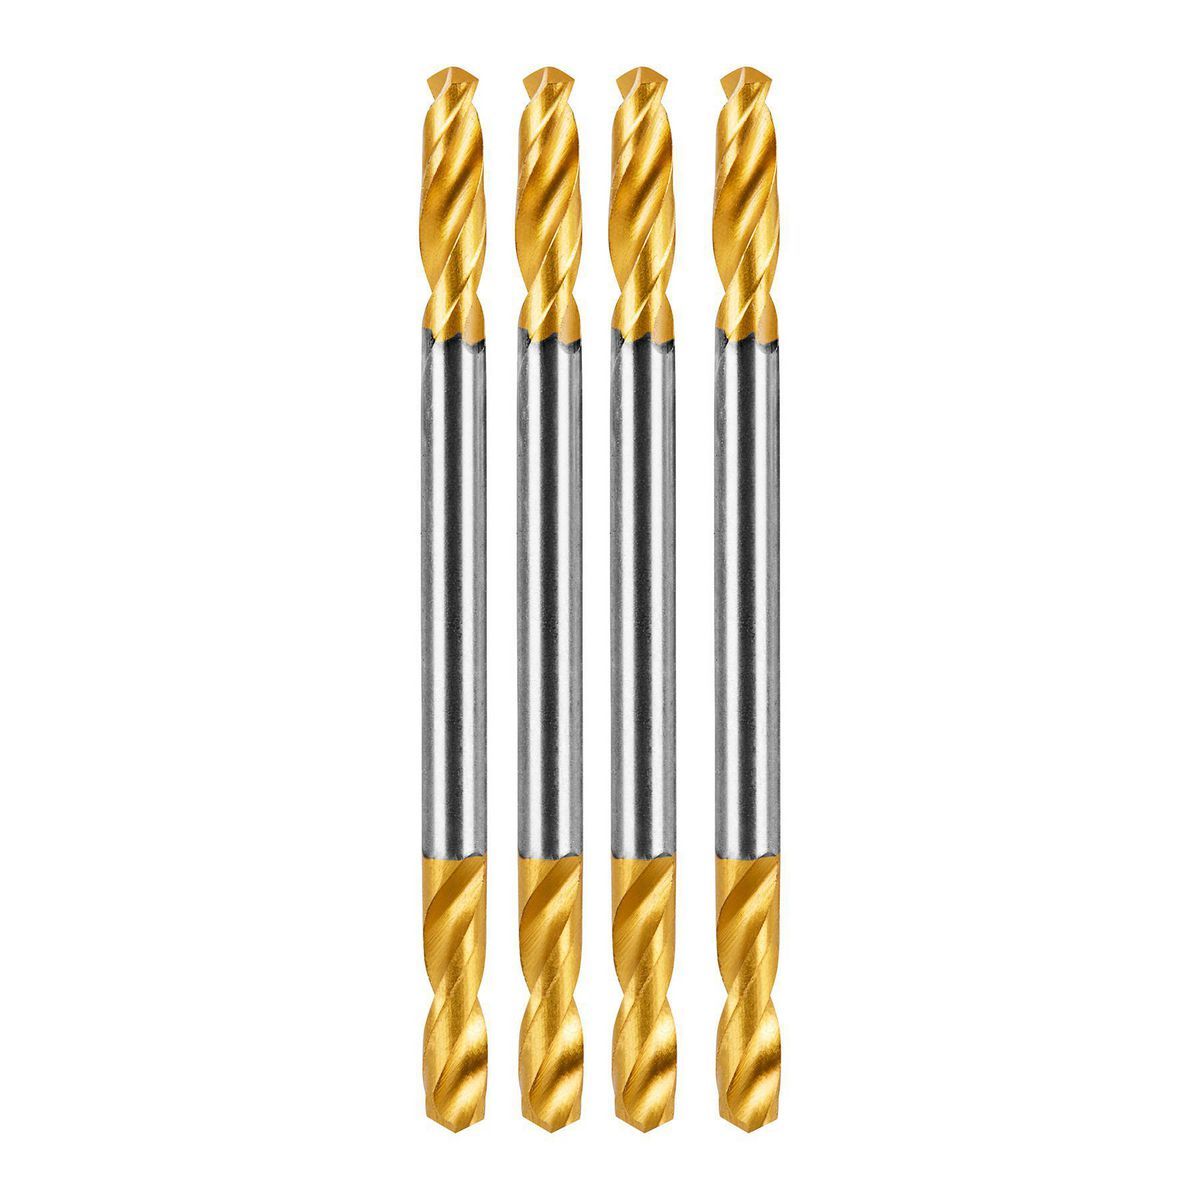 1/8 in. Double-Ended Titanium Drill Bits, 4-Piece